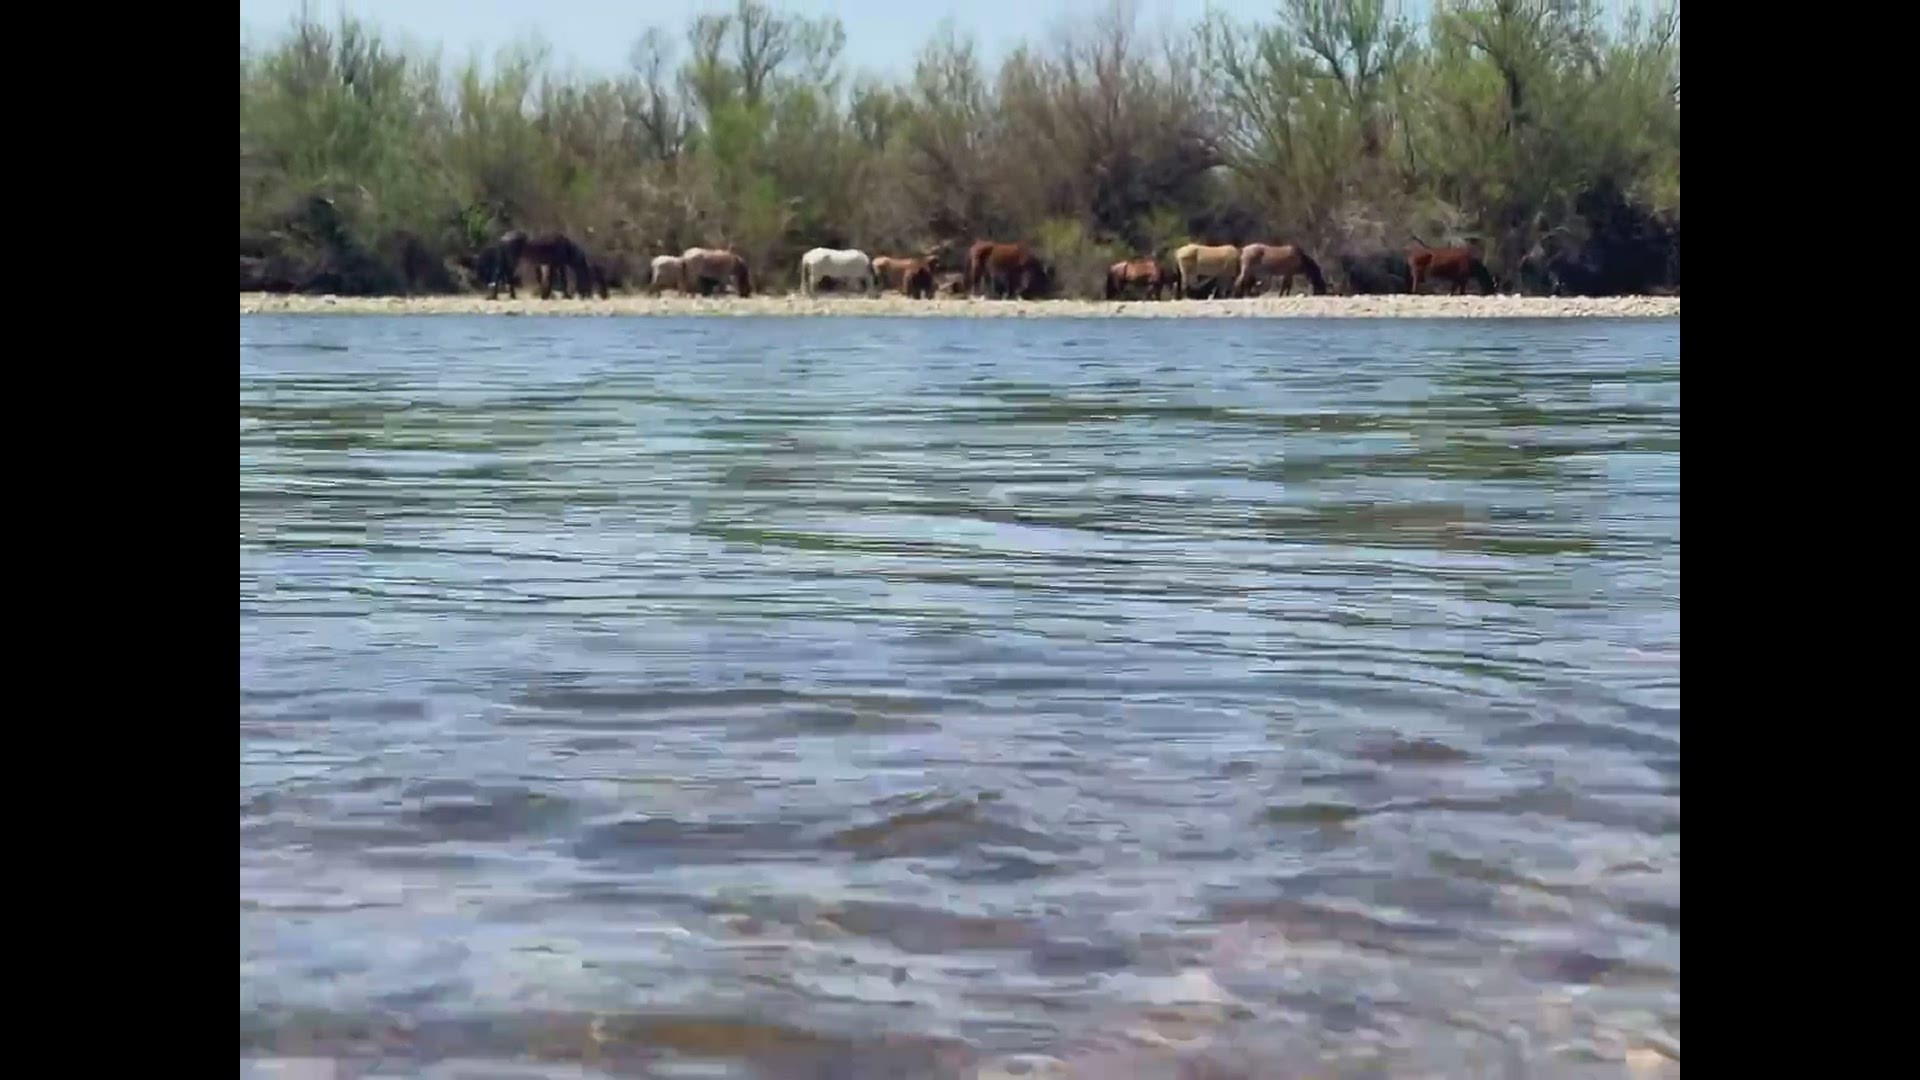 Horses gather at water in Tonto National Forest on March 30
Credit: Chuck Donald